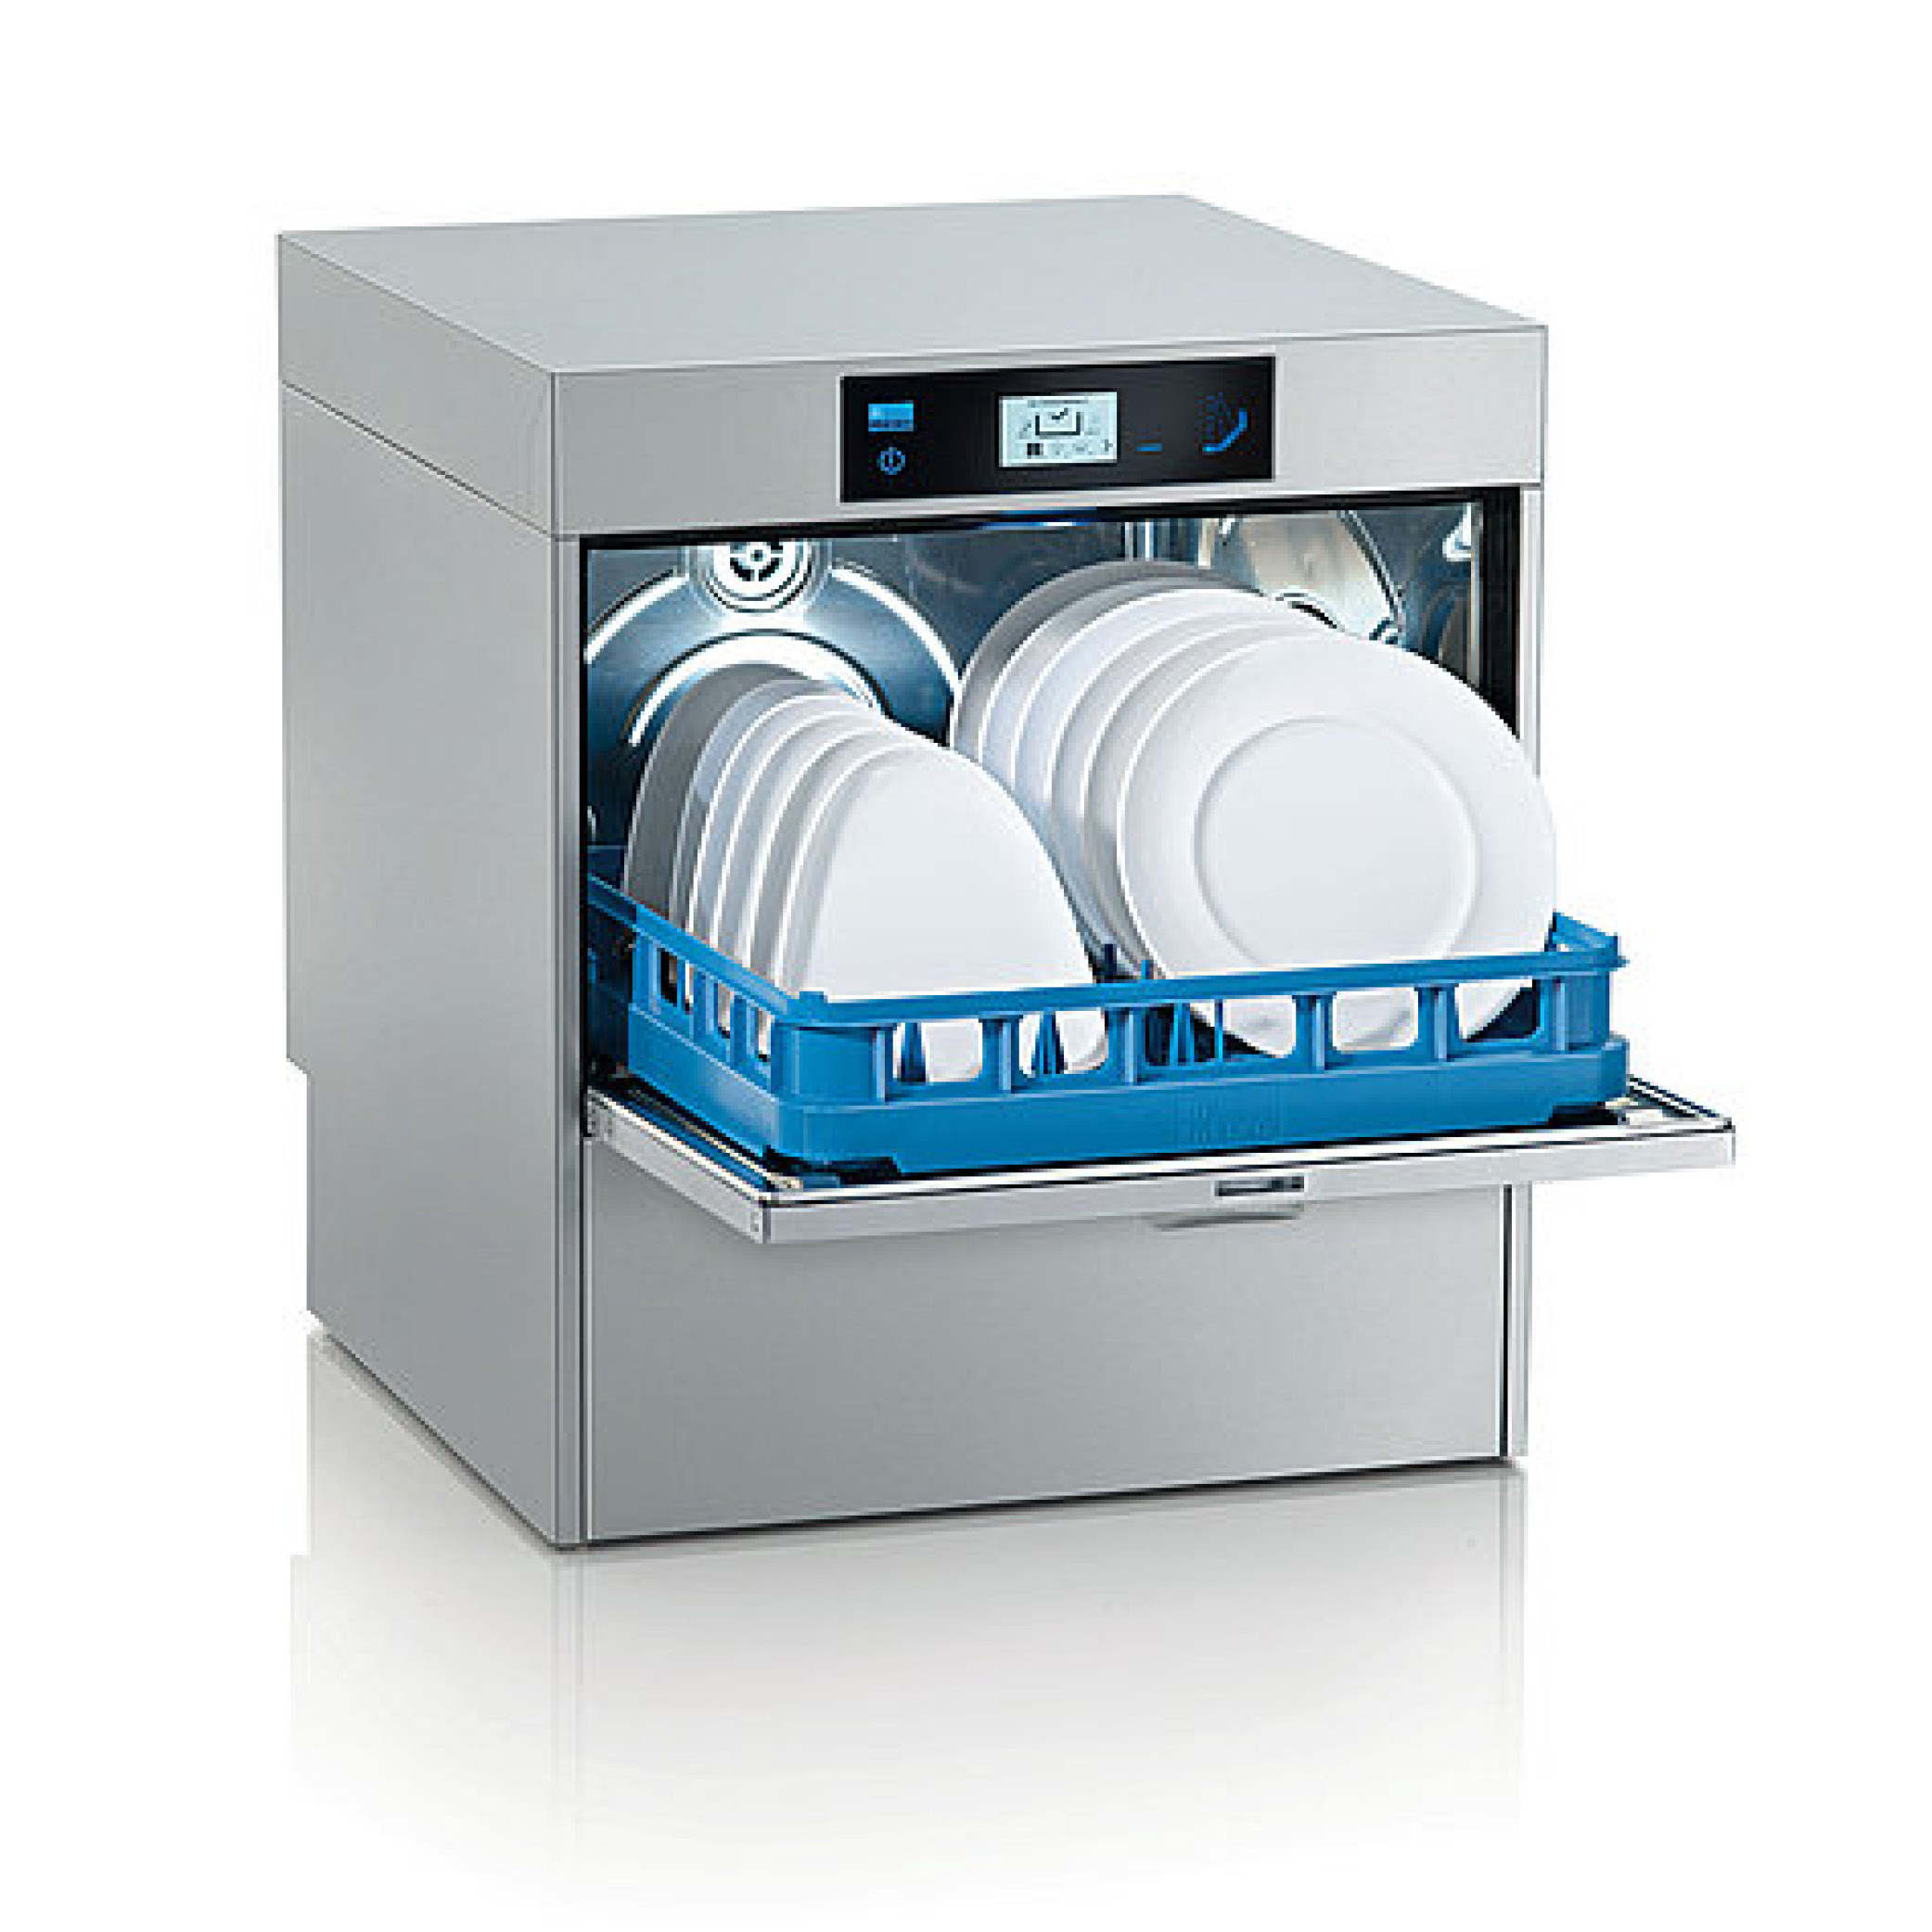 M-iClean Undercounter Glass and Dishwashers